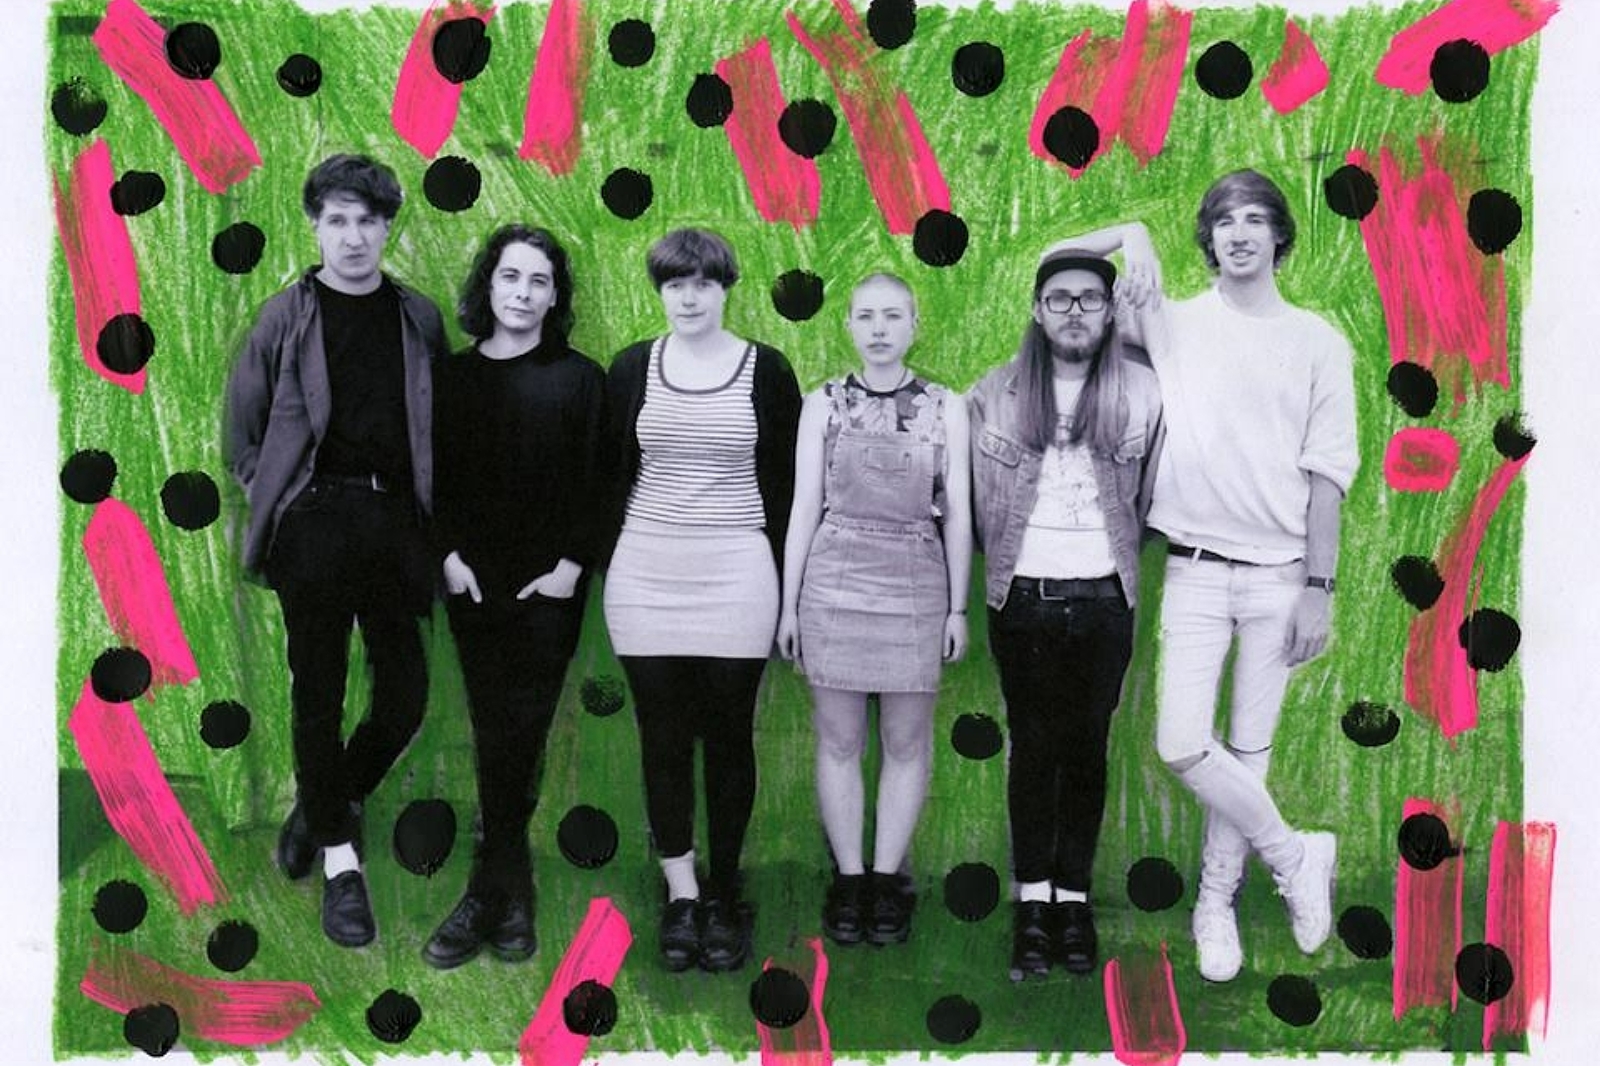 Joanna Gruesome to headline End of the Road's Christmas Shindig